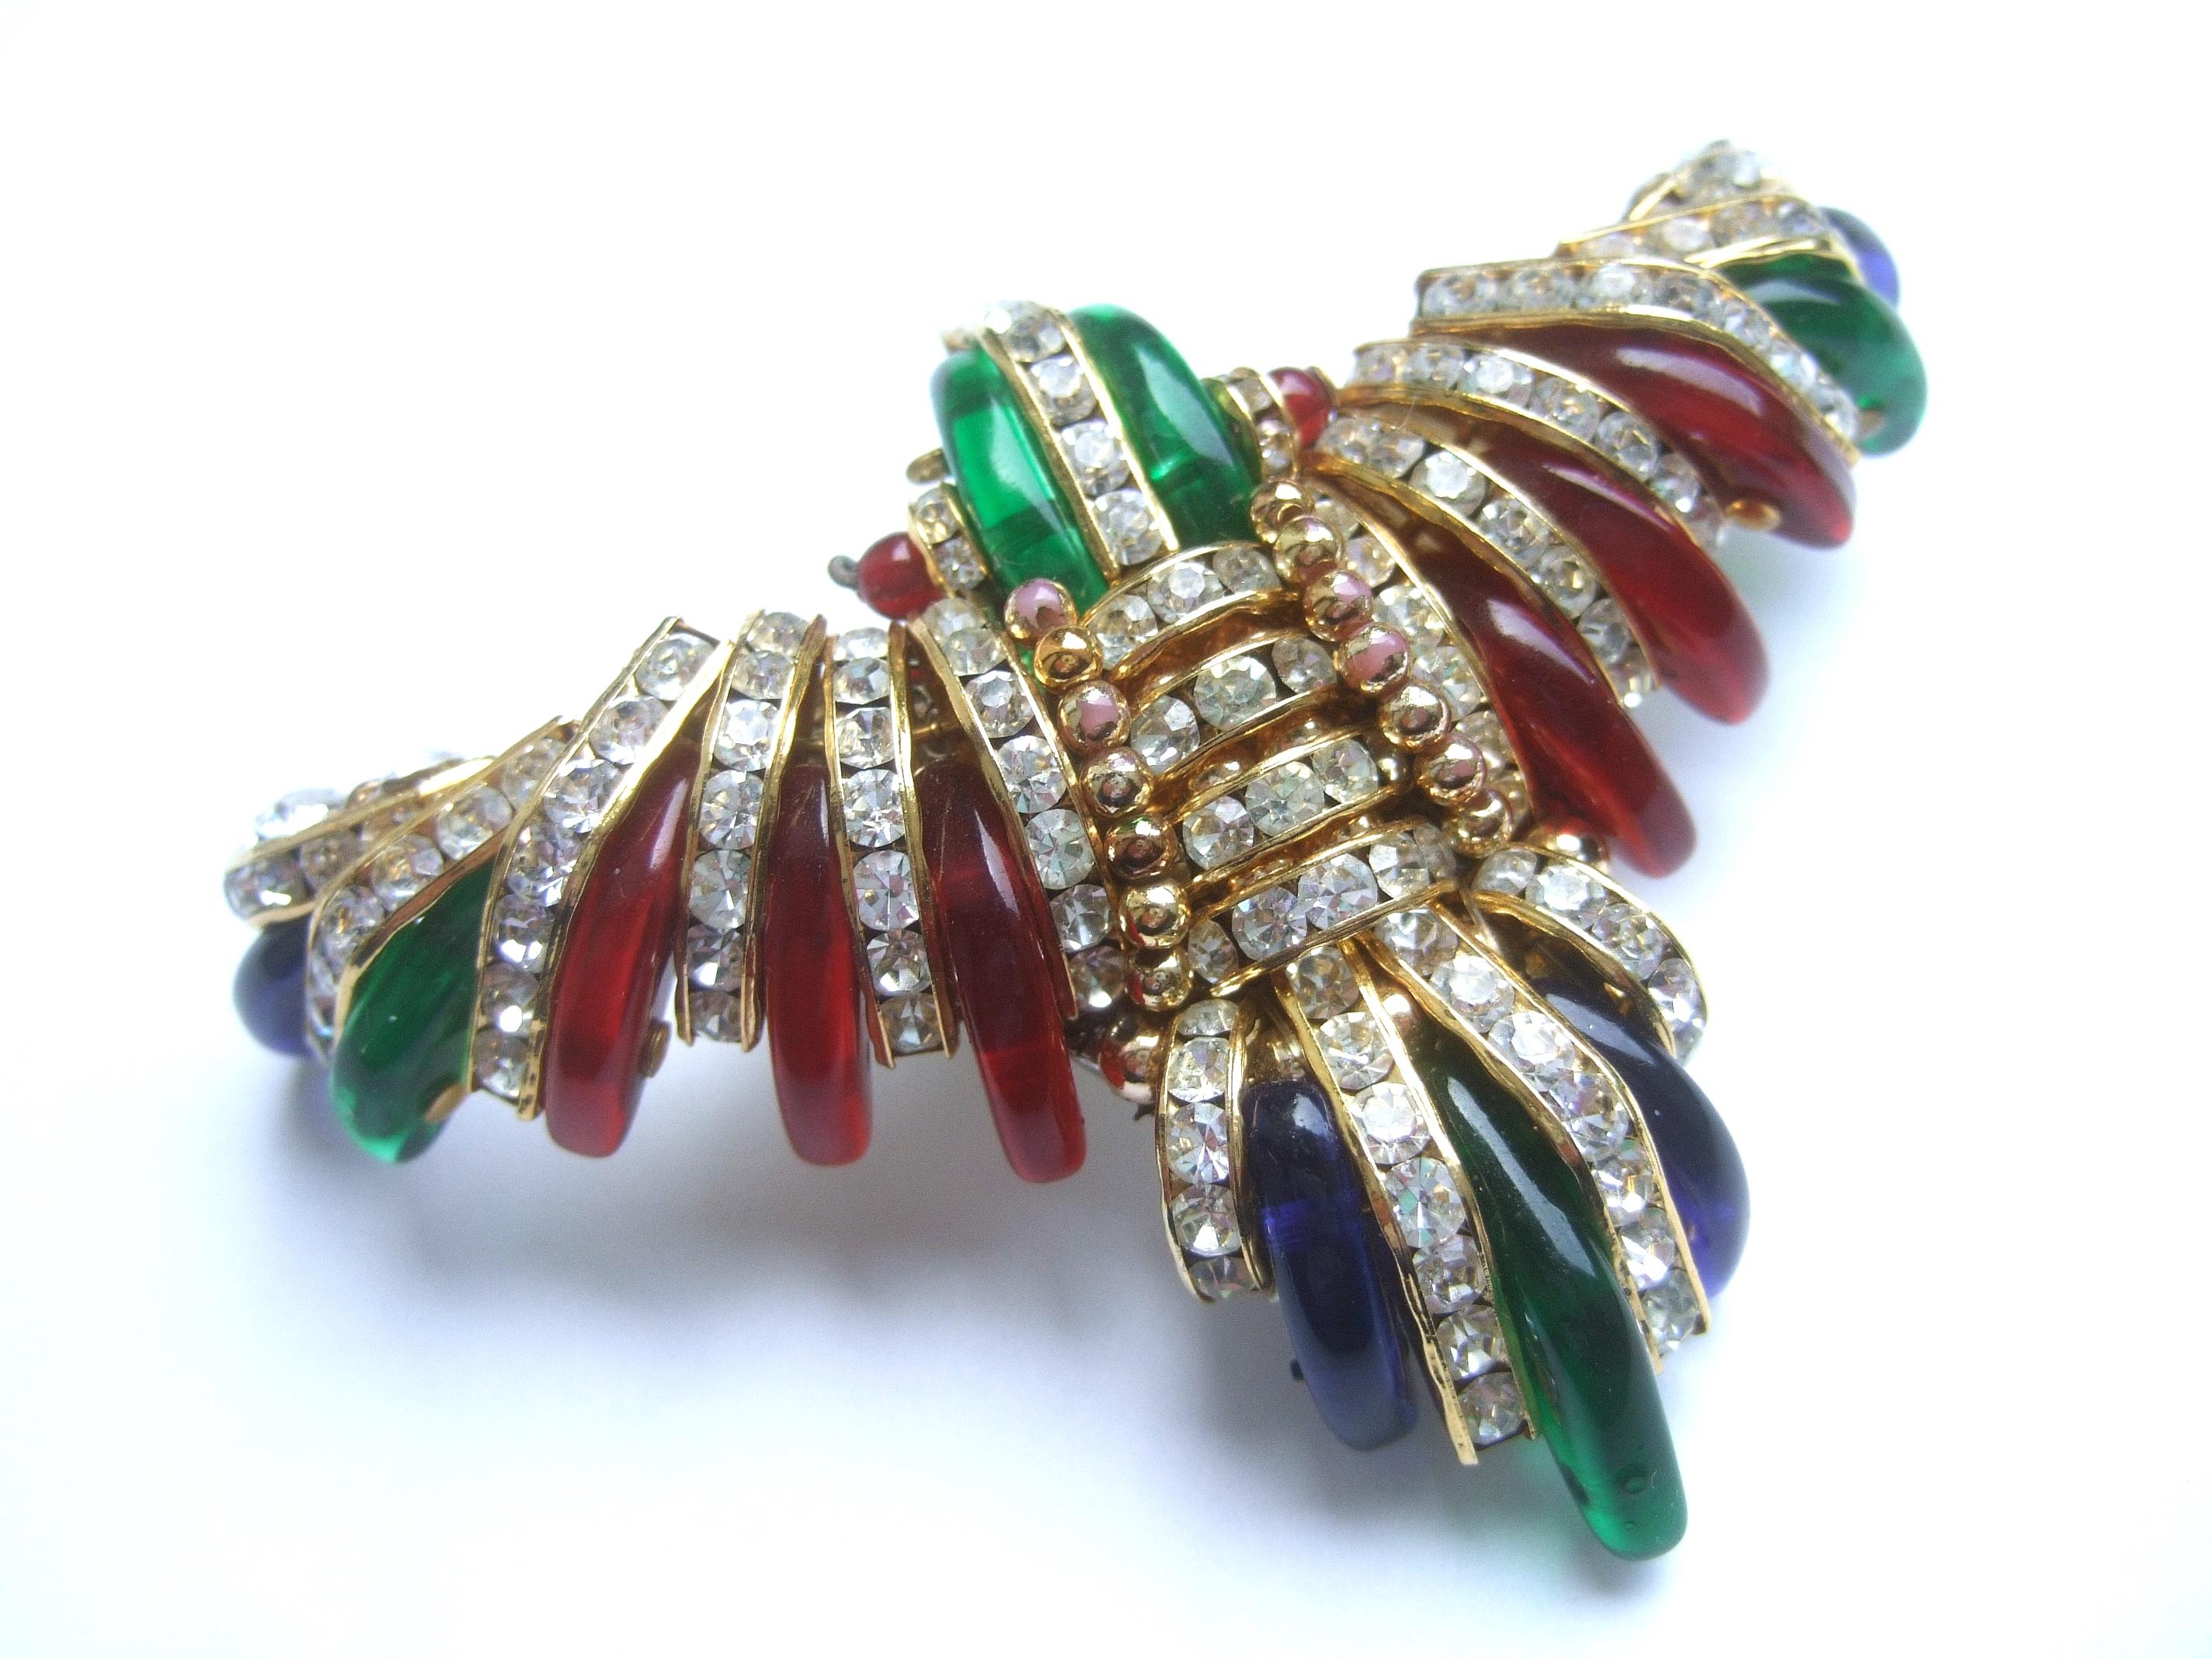 Exquisite glass & crystal large bird brooch c 1970s
The large scale stylized bird brooch is embellished with slivers of emerald green,
sapphire blue & ruby red glass color claw shaped settings

Interspersed within the jewel-tone glass settings are